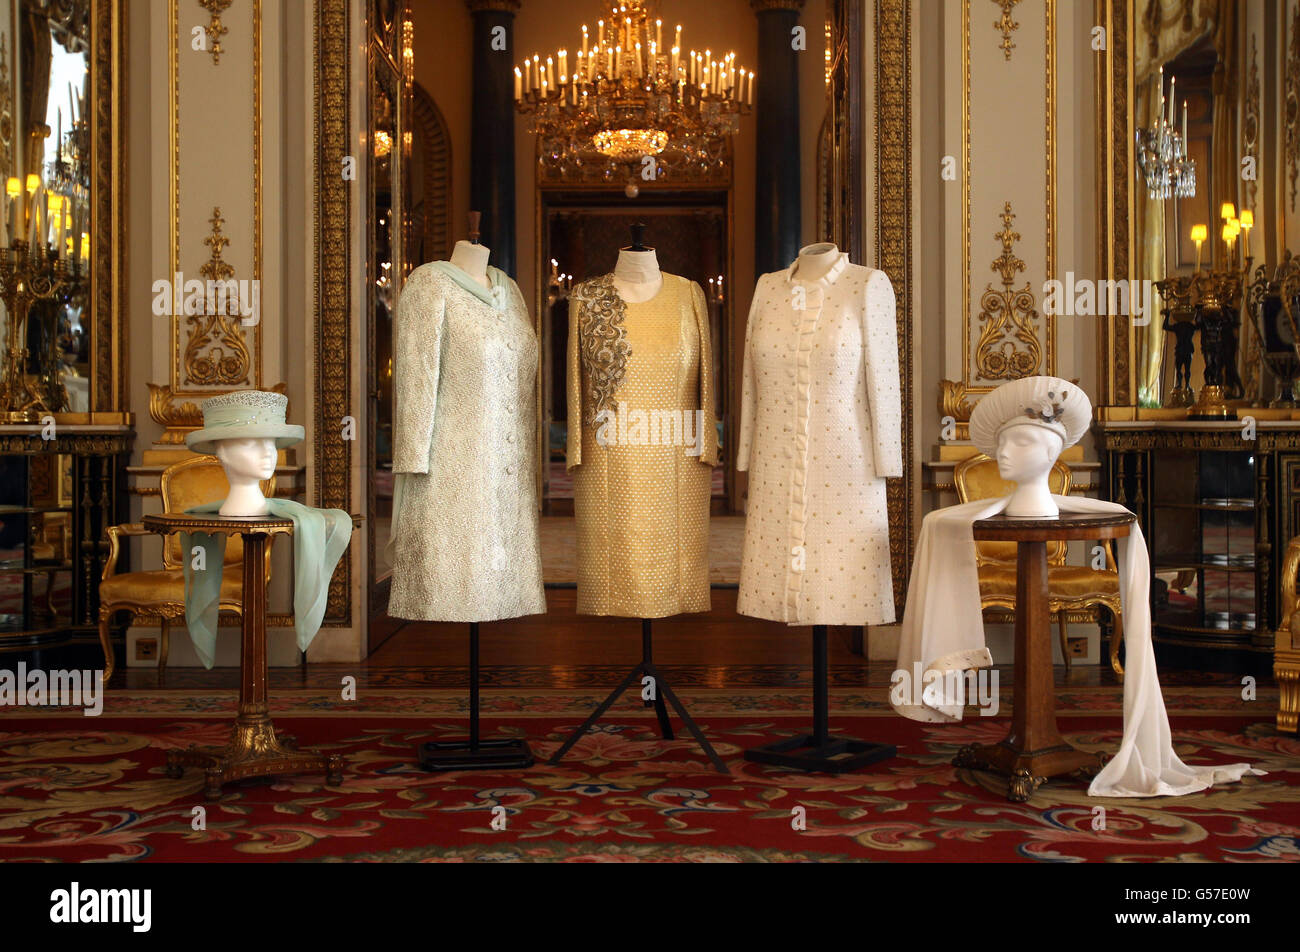 The three dresses worn by Queen Elizabeth II during her Diamond Jubilee celebrations, designed and created by Angela Kelly MVO. Stock Photo